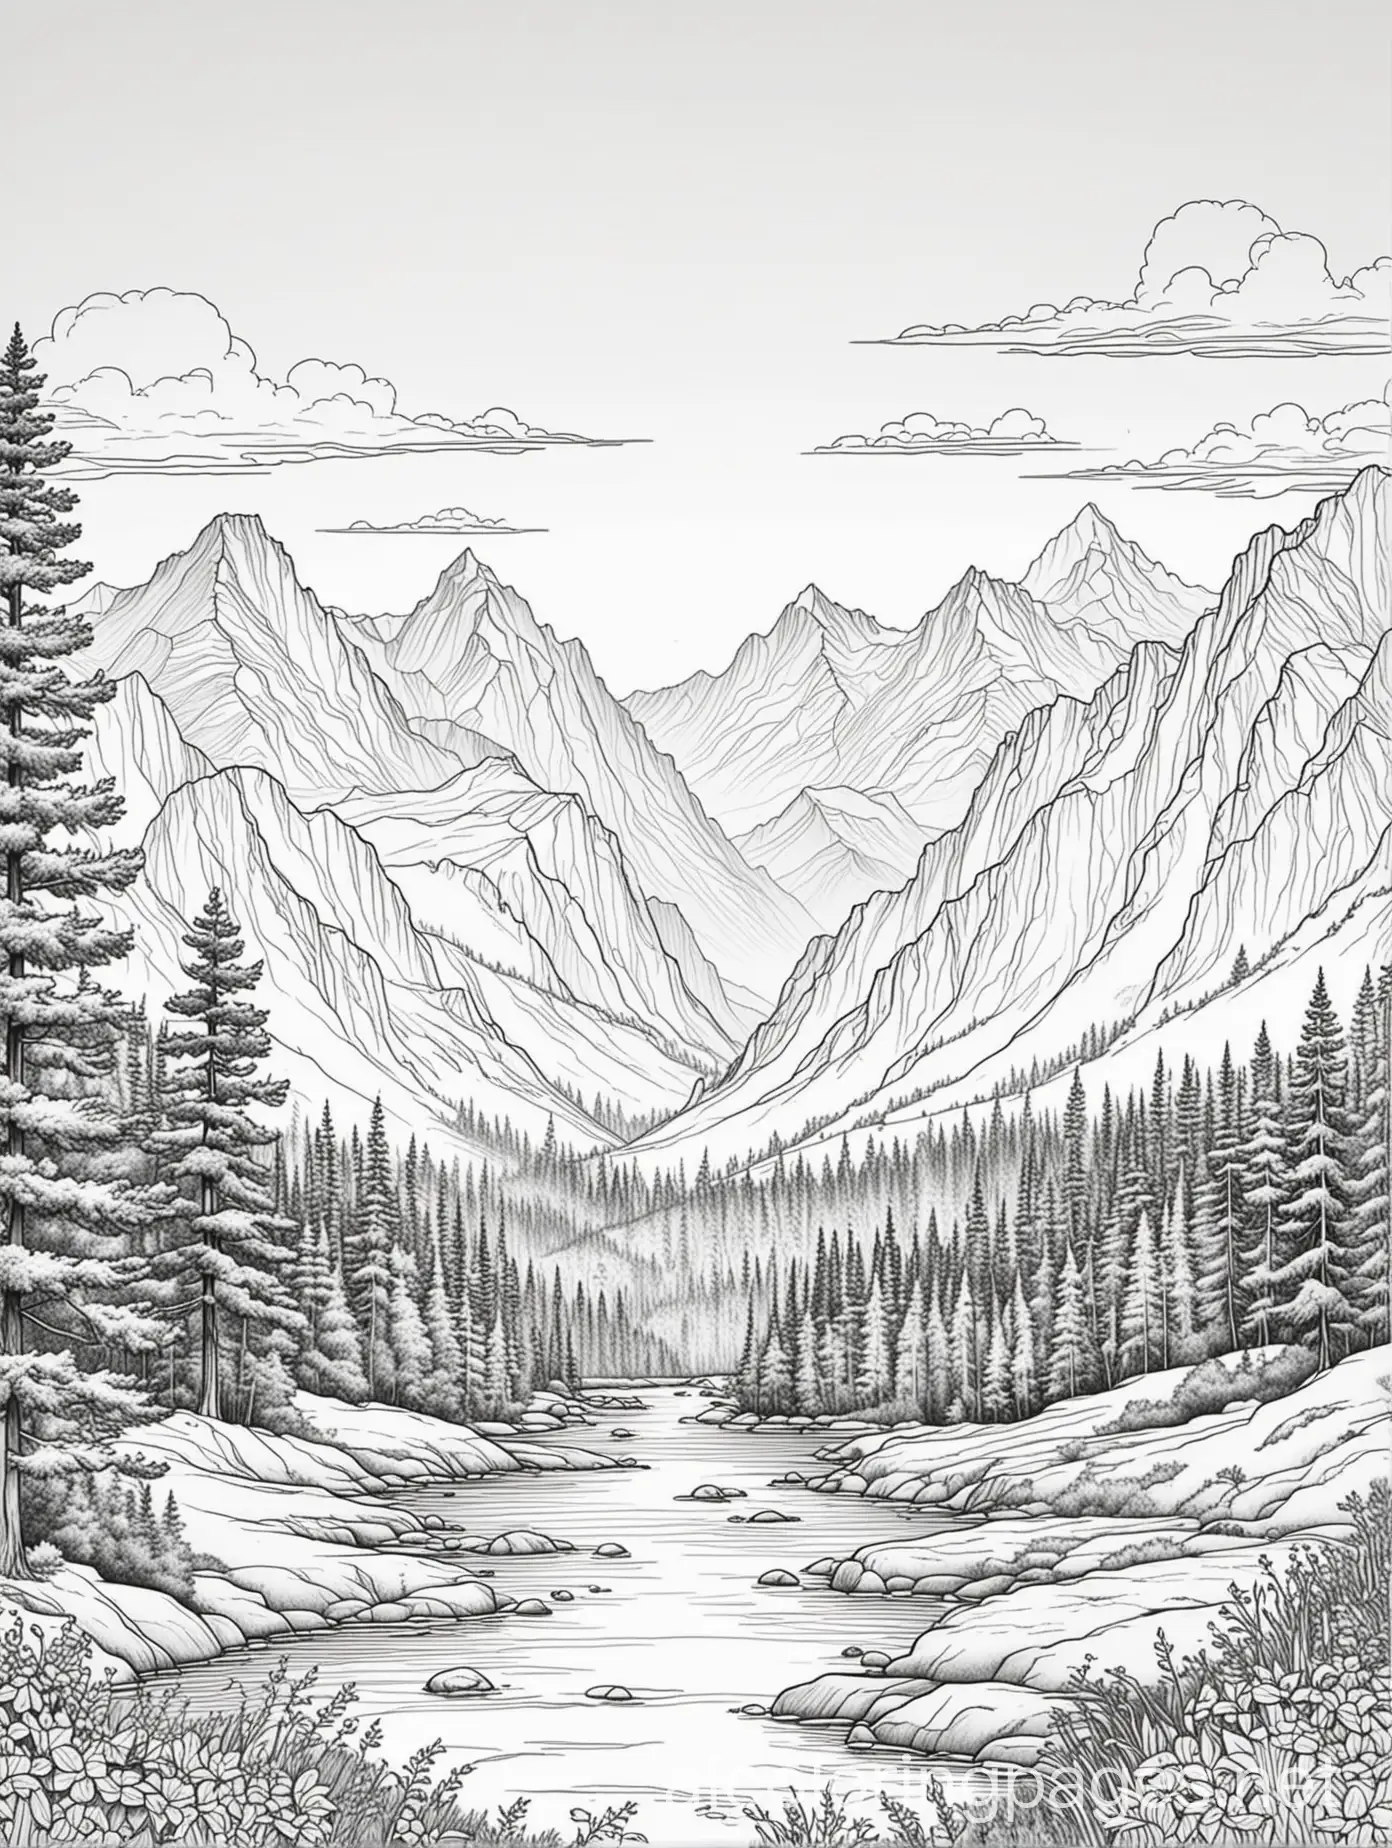 calm and peaceful nature scene mountains, Coloring Page, black and white, line art, white background, Simplicity, Ample White Space. The background of the coloring page is plain white to make it easy for young children to color within the lines. The outlines of all the subjects are easy to distinguish, making it simple for kids to color without too much difficulty